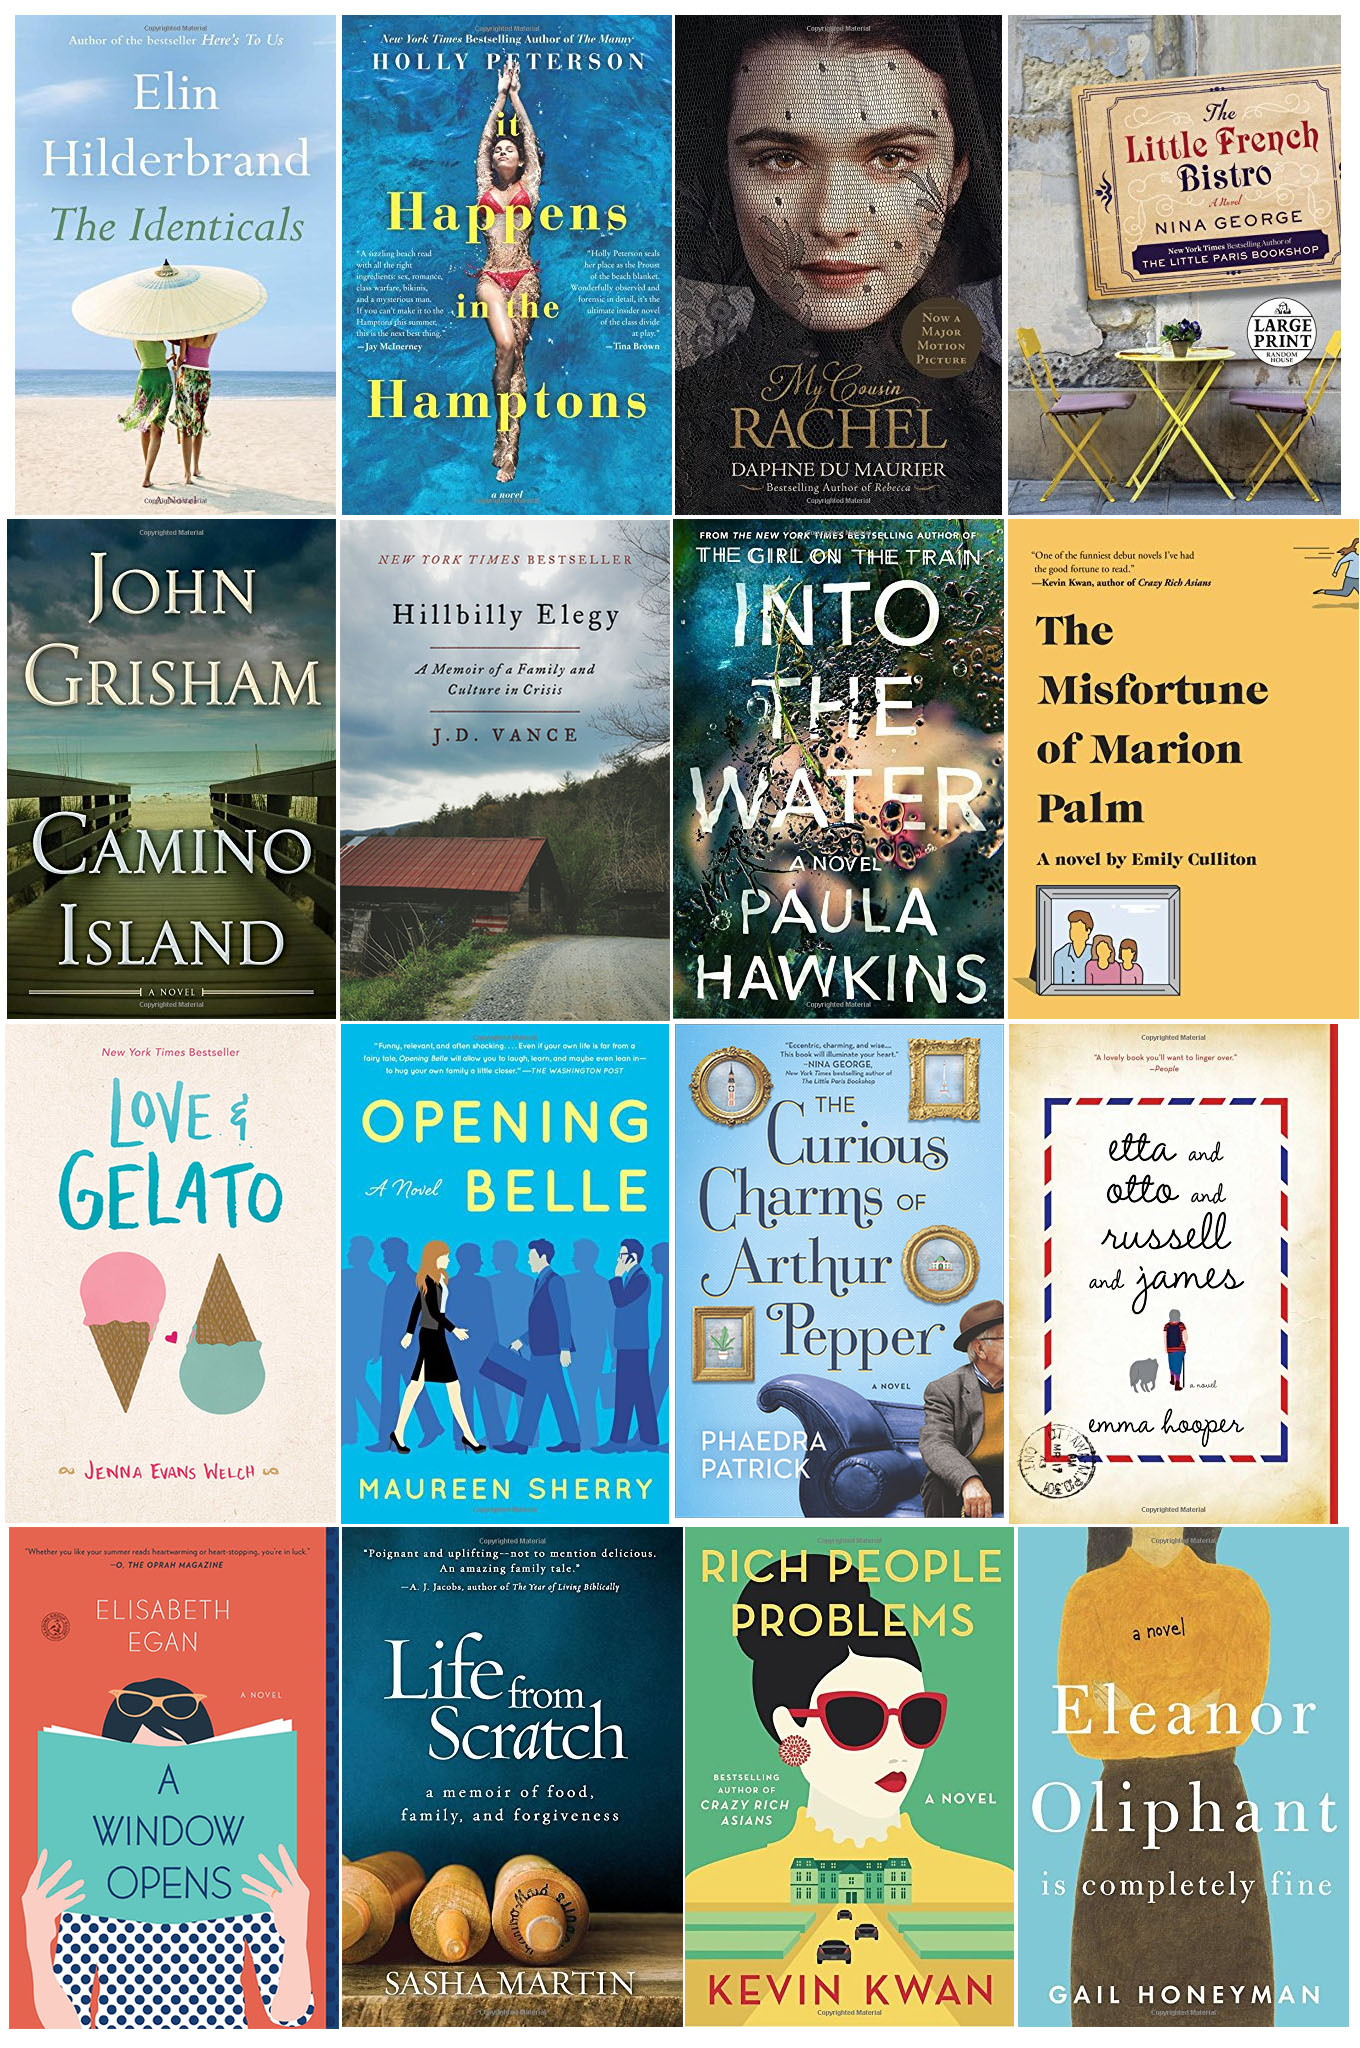 Need a good book to read? Ridgely Brode has selected 16 books to read this Summer and is sharing them on her blog, Ridgely's Radar.